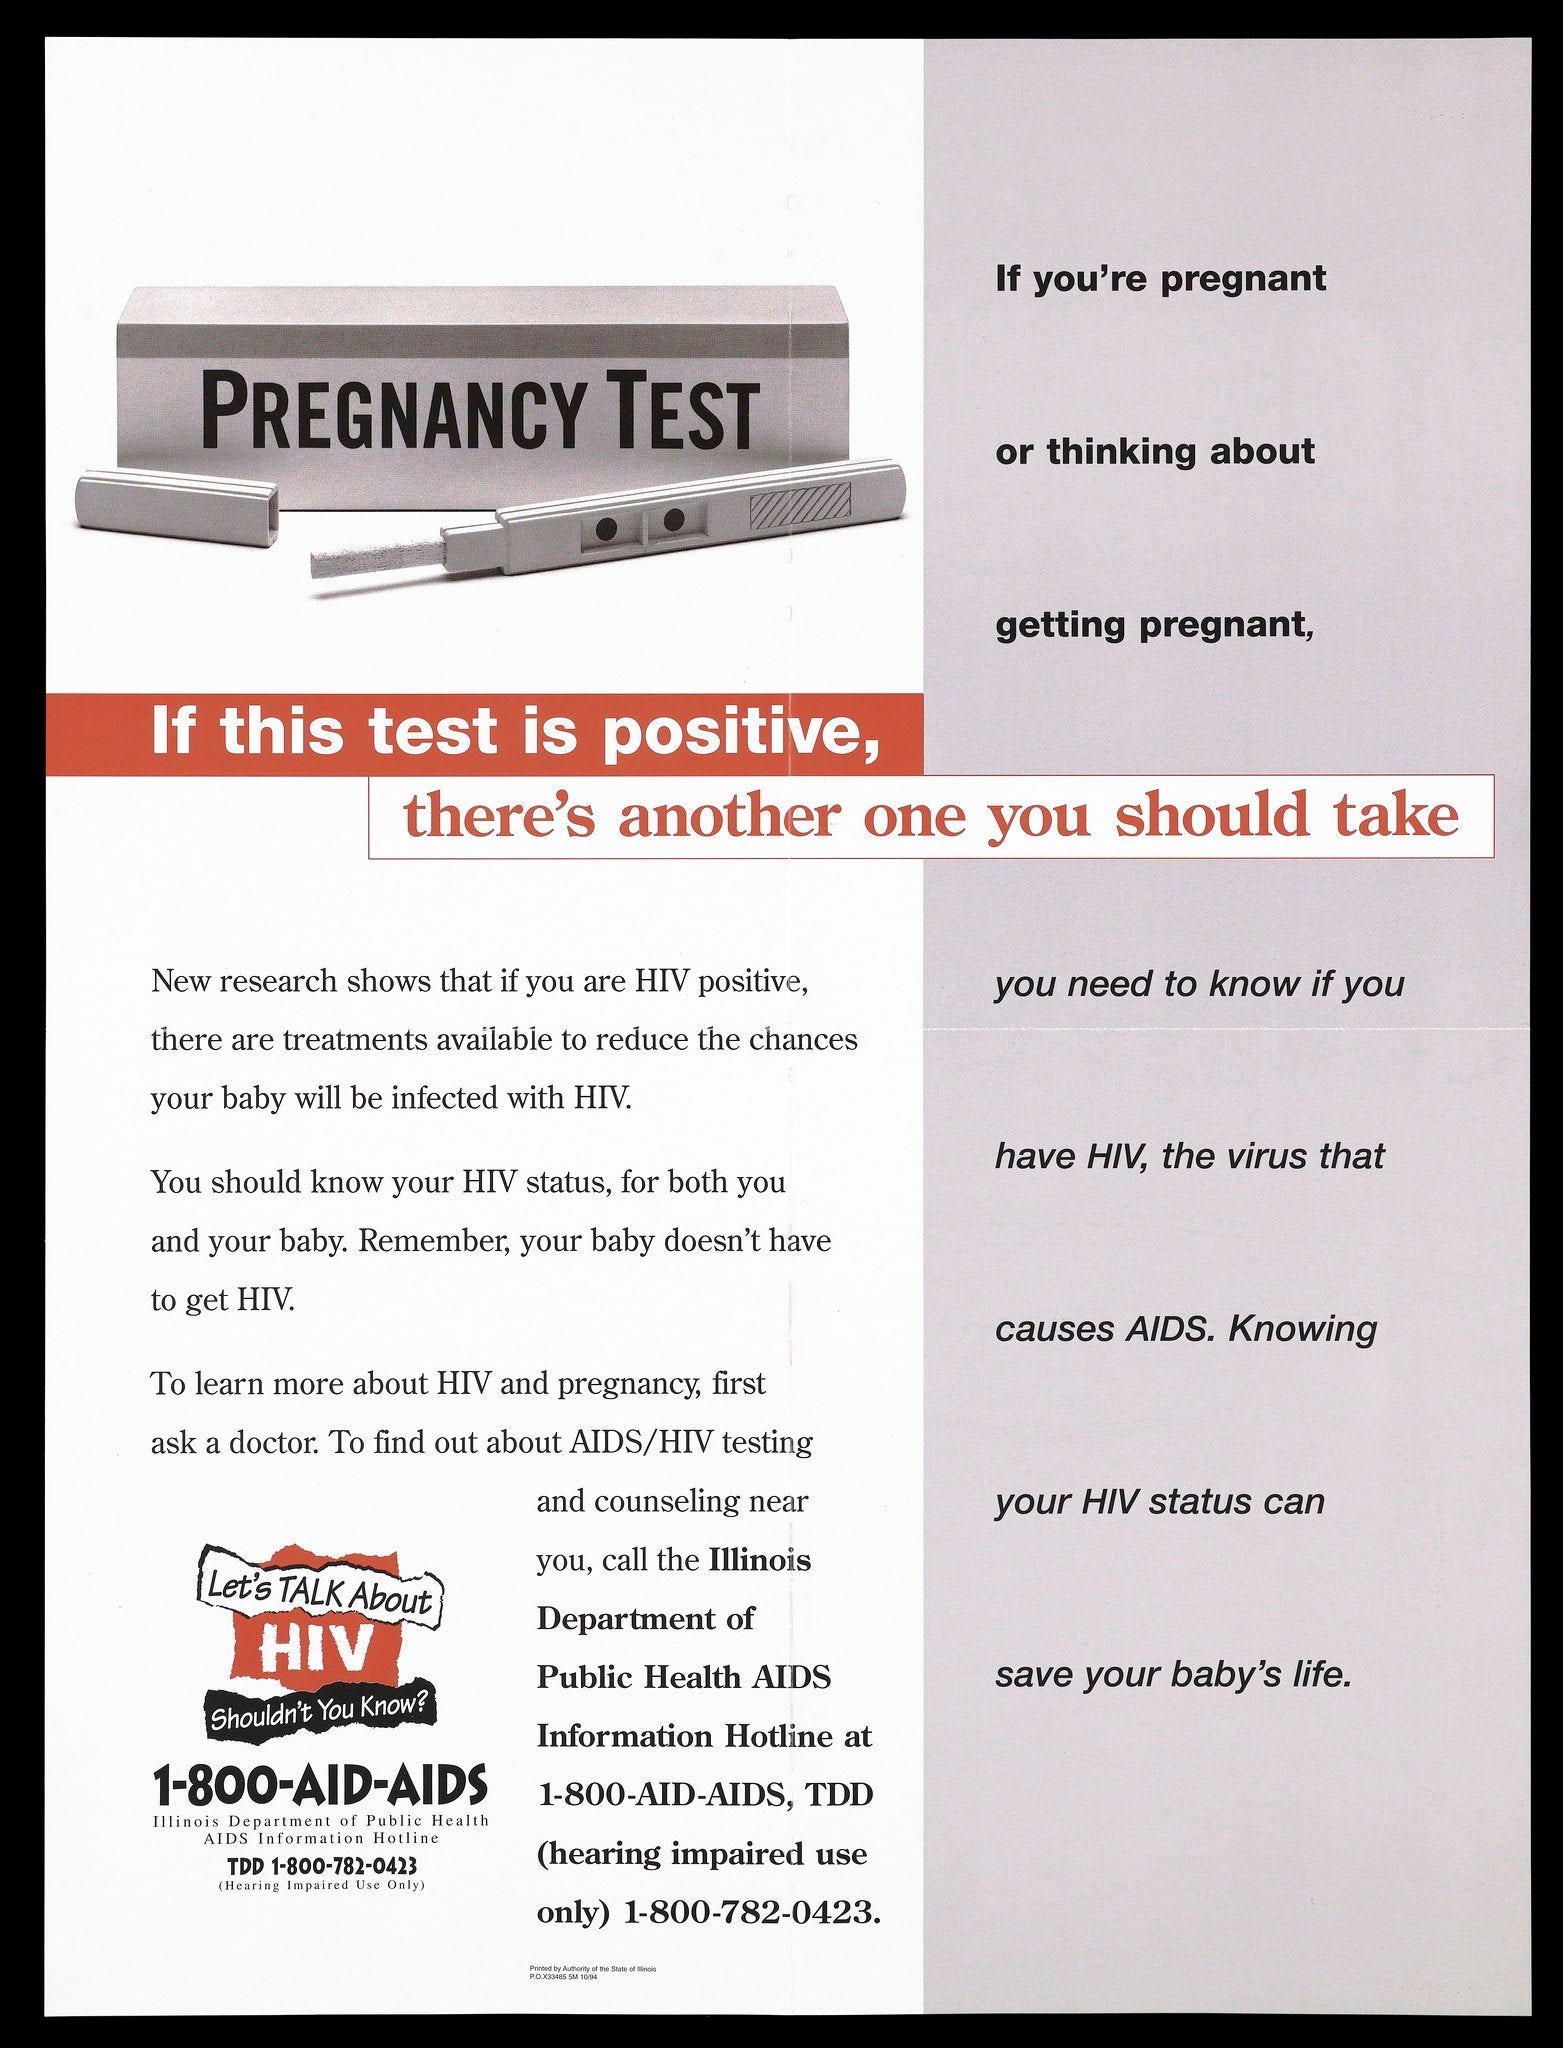 Informative poster for HIV/AIDS directed for pregnant women, showing pregnancy test